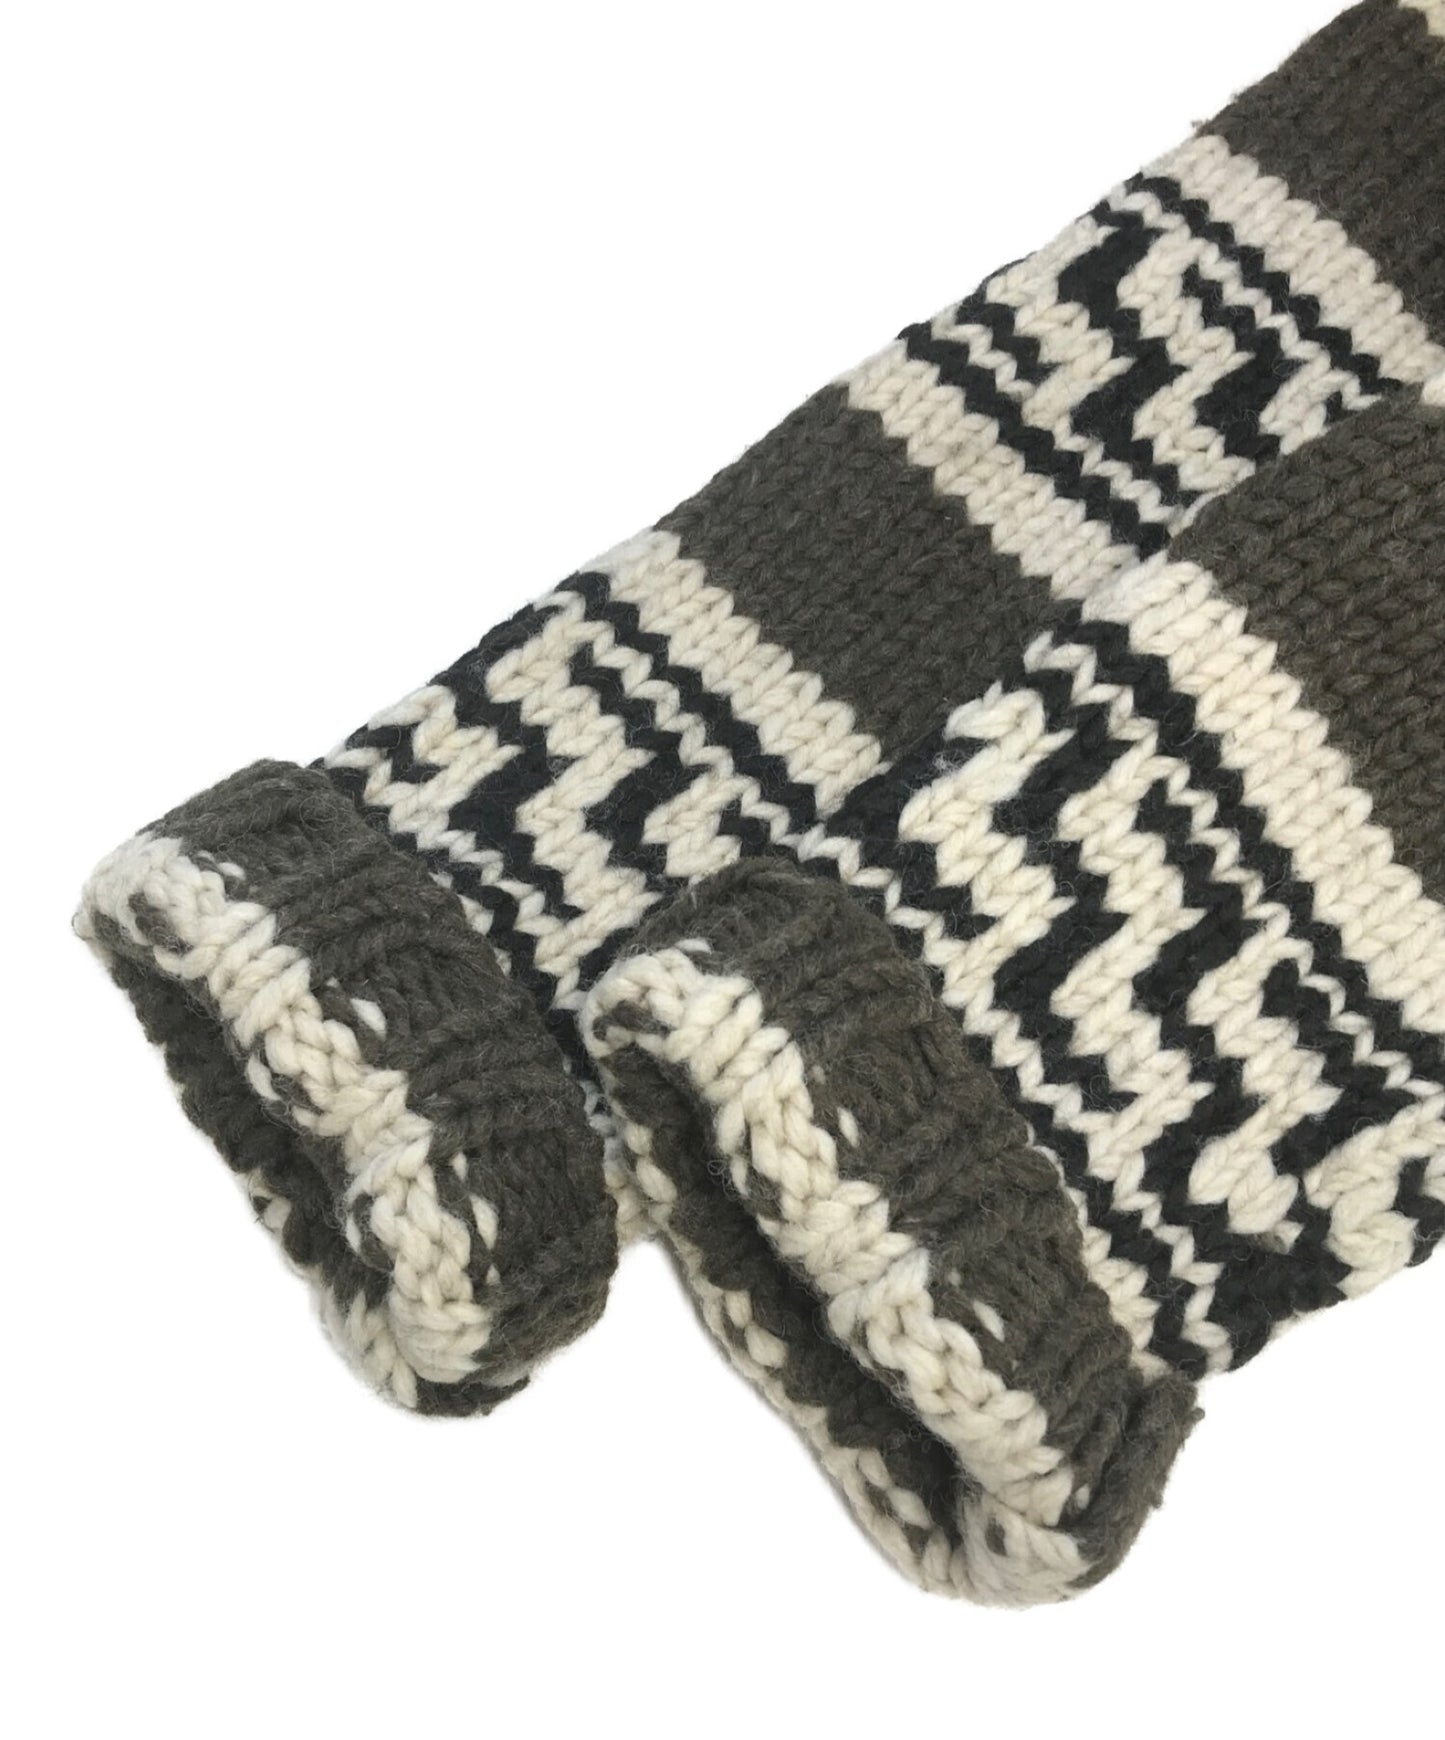 [Pre-owned] COMME des GARCONS JUNYA WATANABE MAN cowtin knit WR-N019